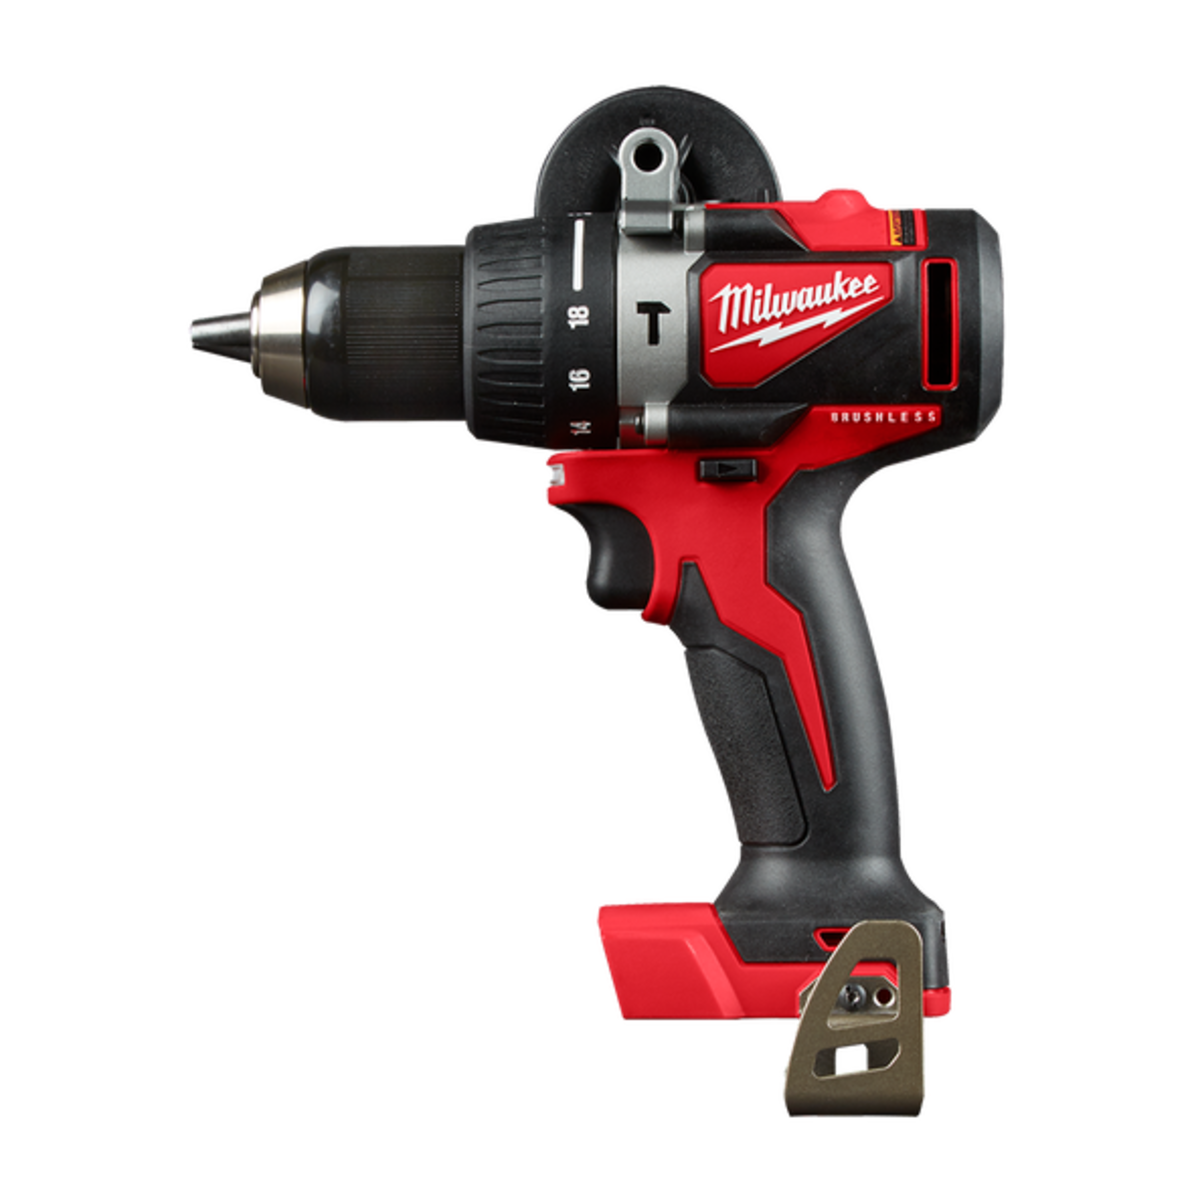 red and black hammer drill